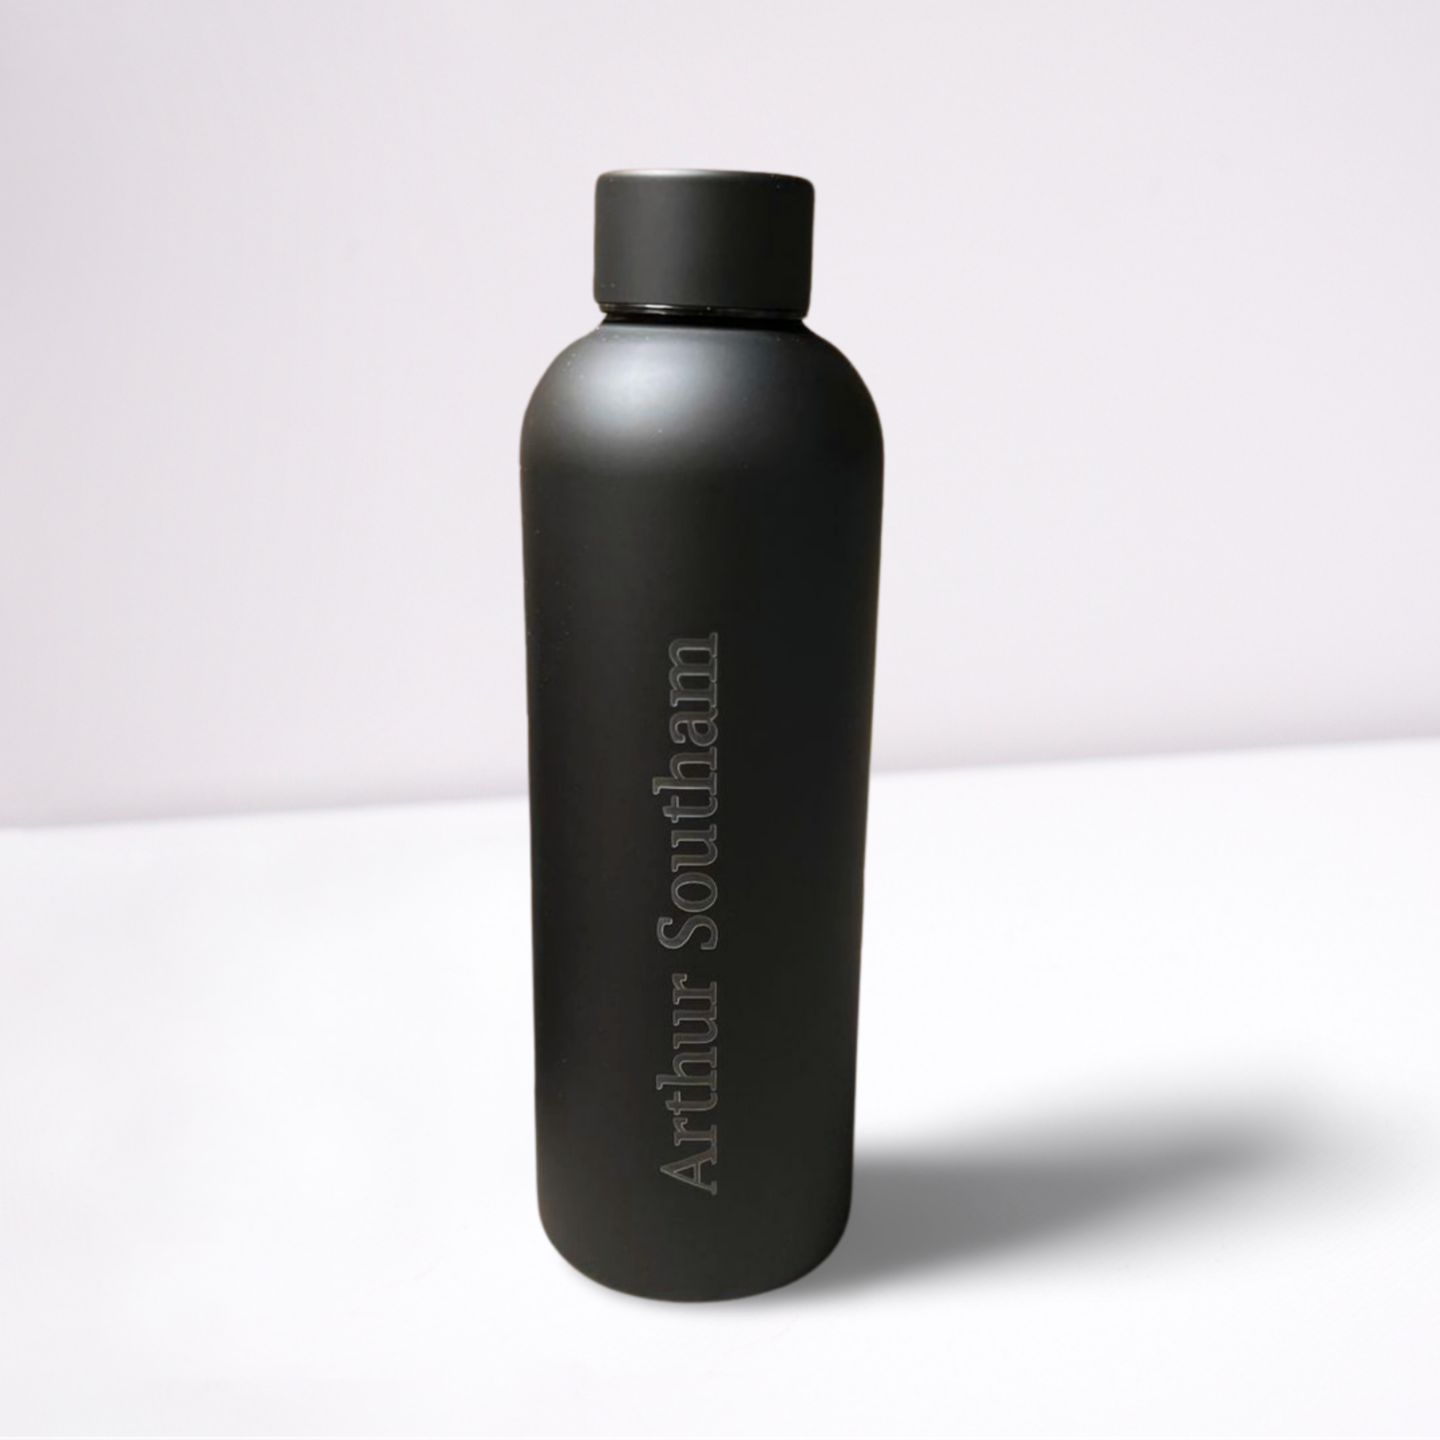 The Personalised Drink Bottle